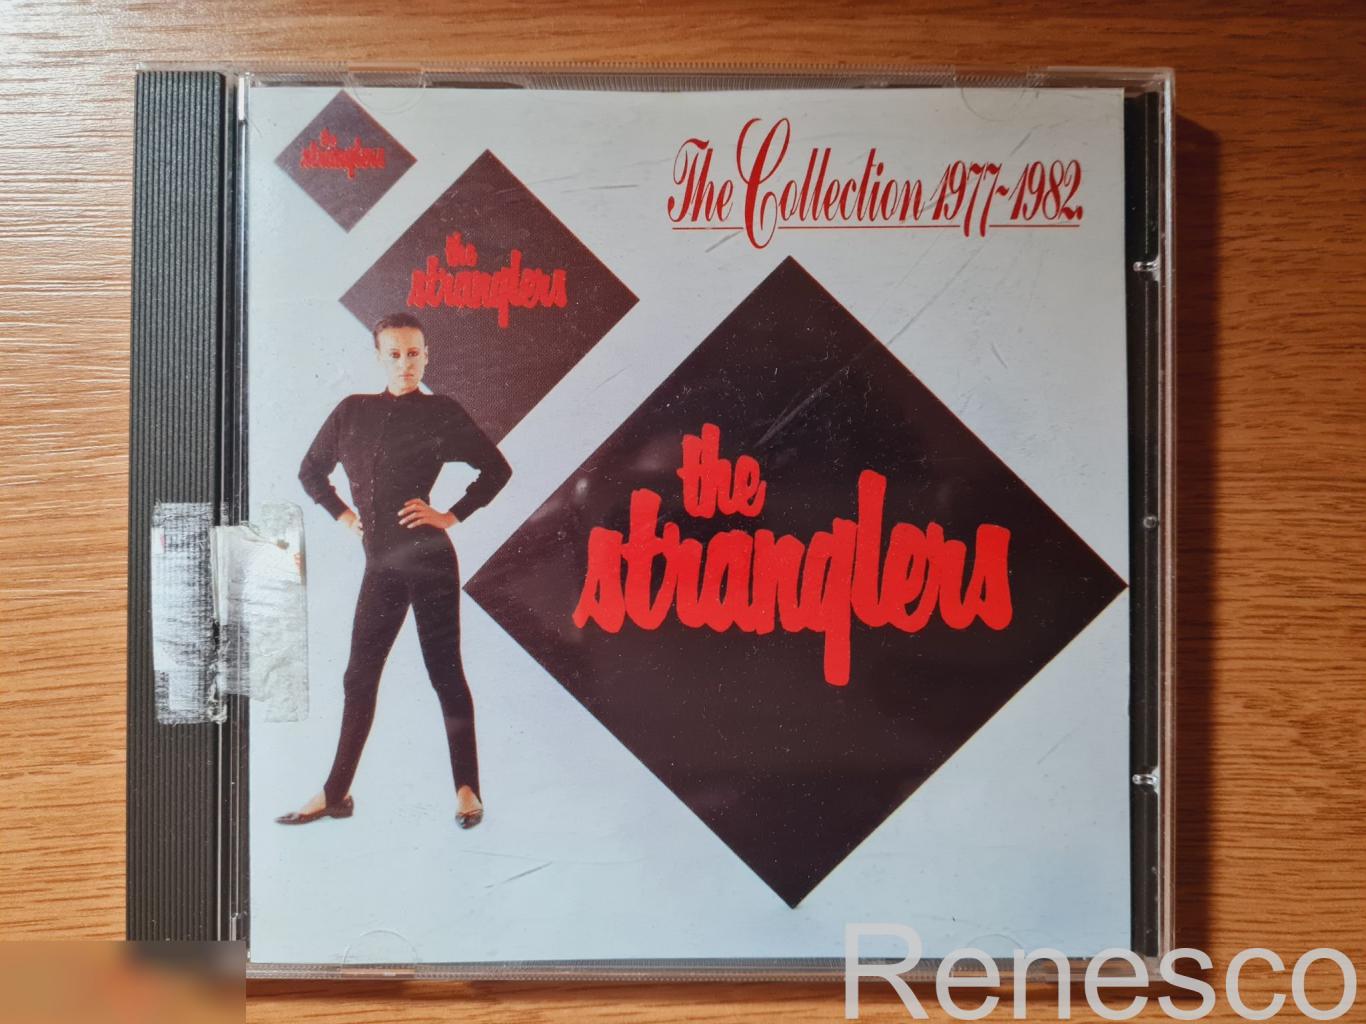 The Stranglers ?– The Collection 1977 - 1982 (UK) (Reissue)